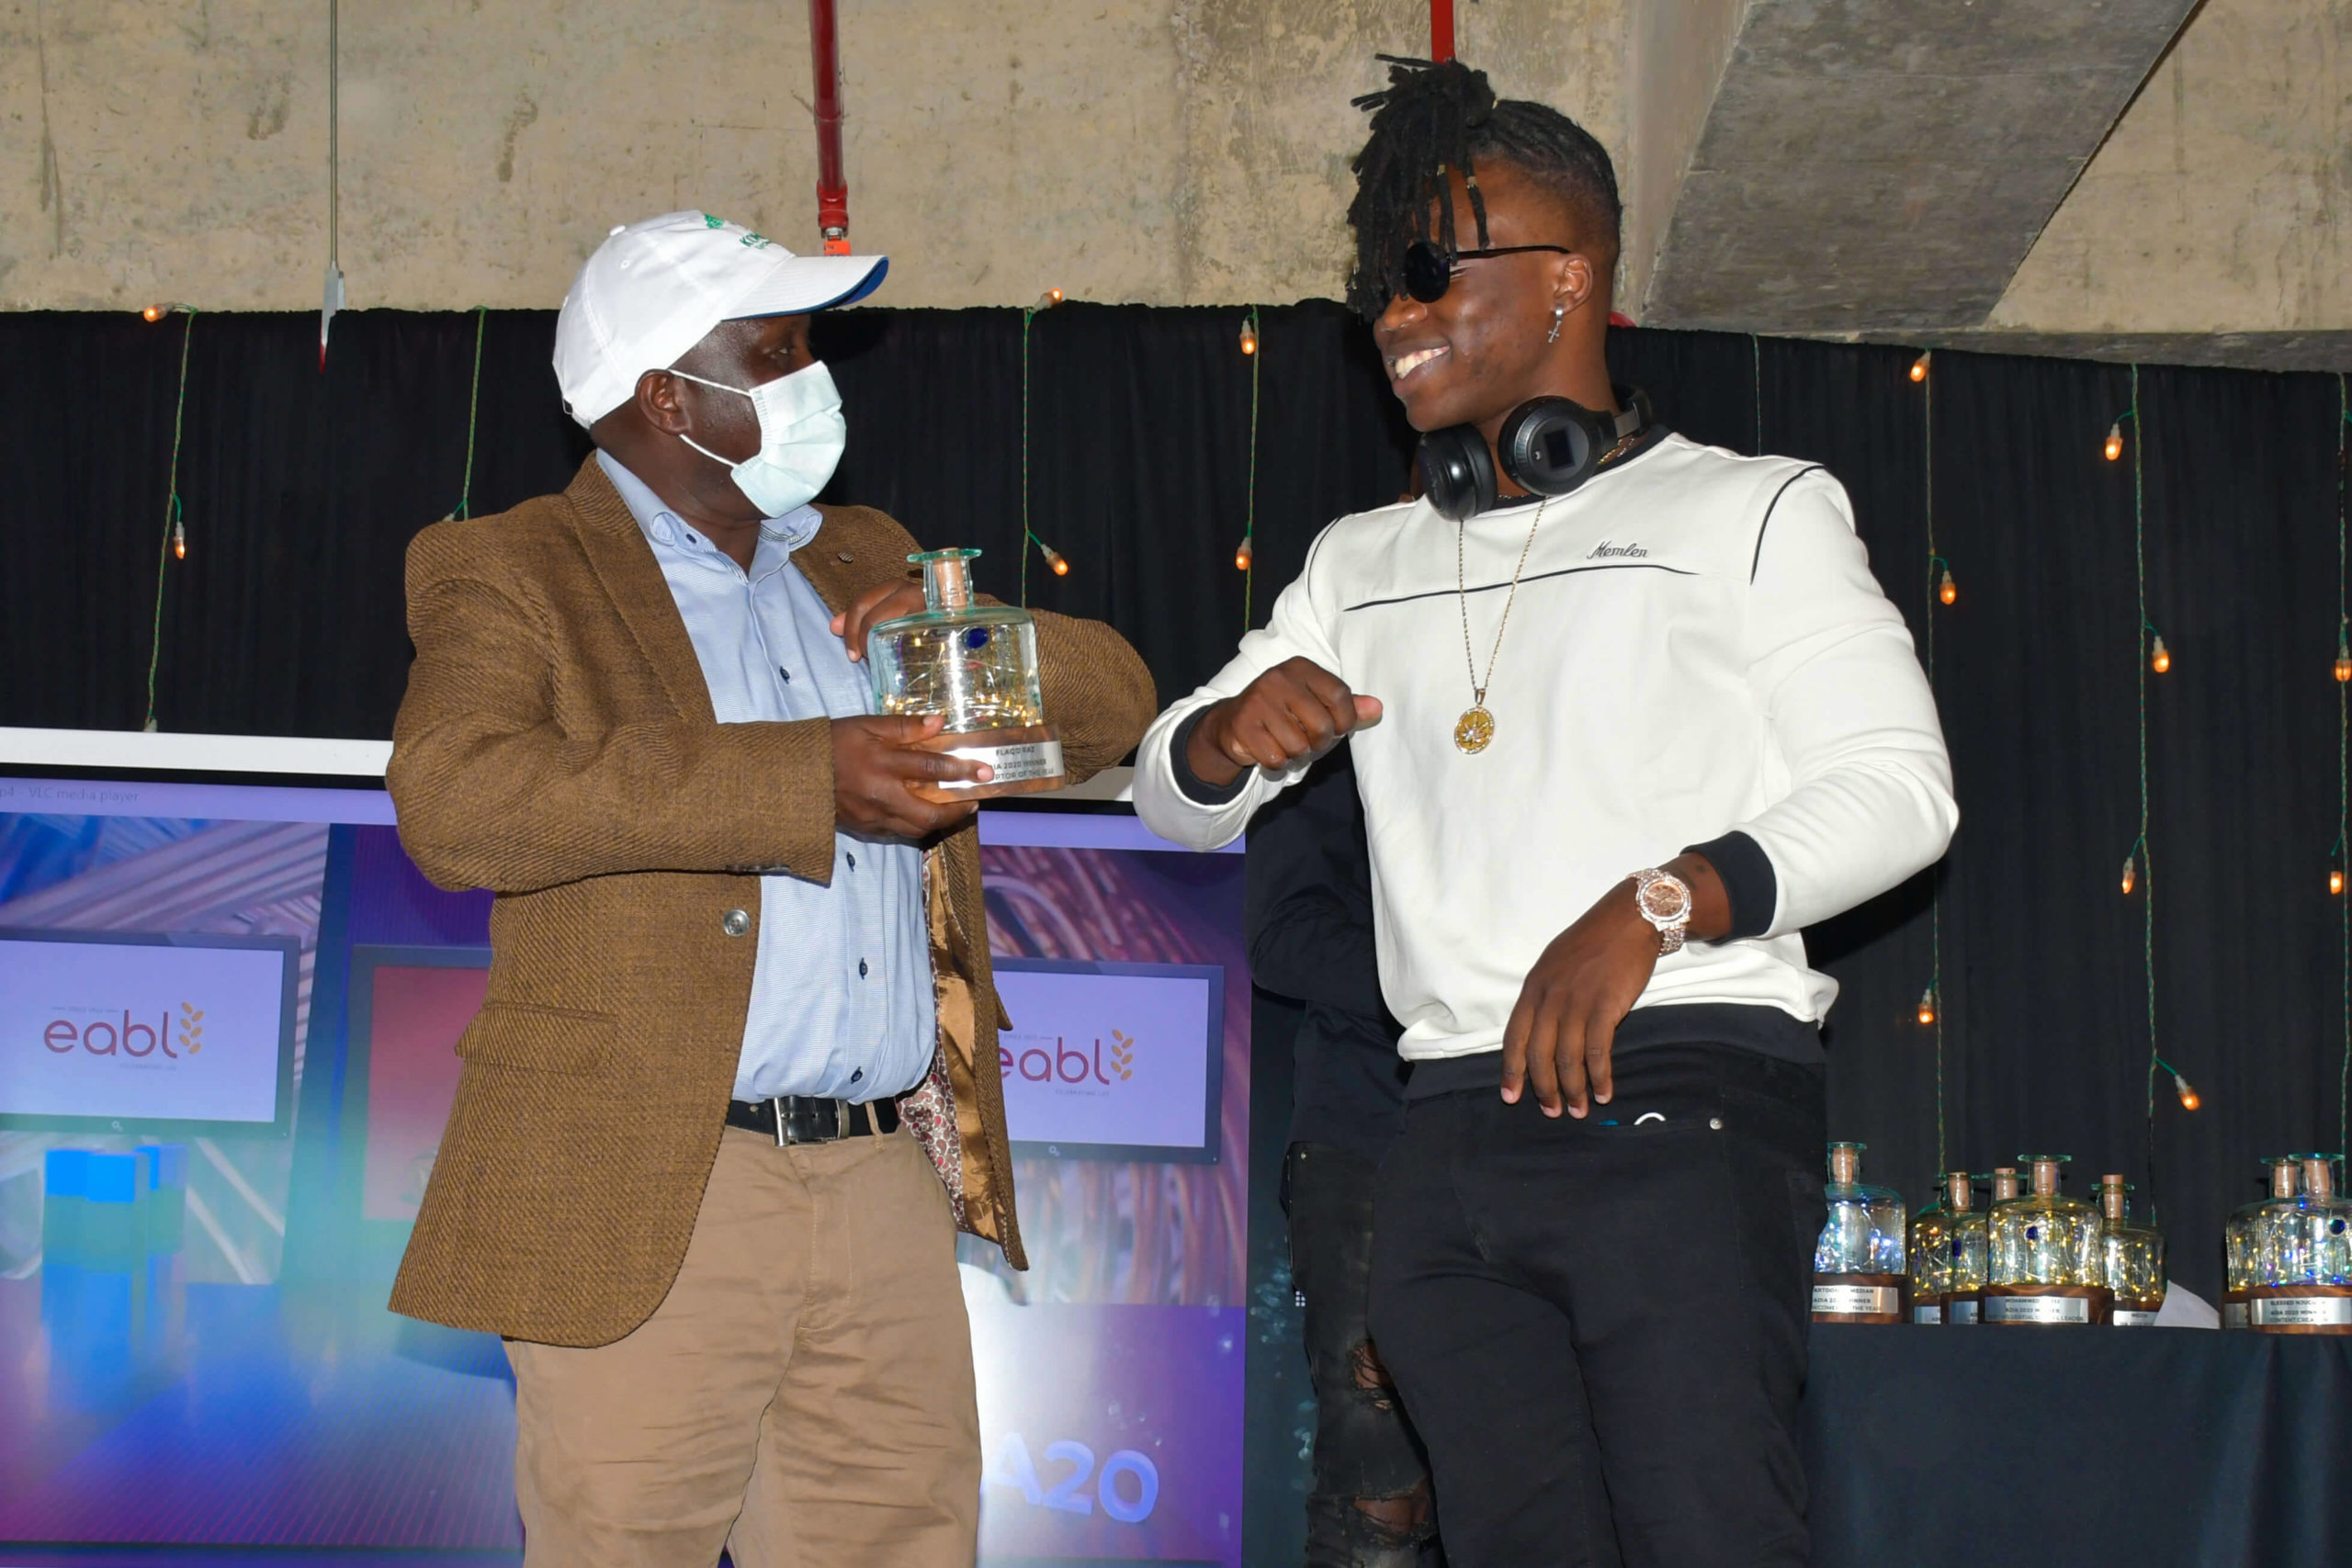 Konza Technopolis Development Authority (KoTDA) CEO Eng. John Tanui (left) with Flaqo Raz who won the Disruptor of the Year Award during the Africa Digital Influencers Awards (ADIA) 2020.The ceremony was held at Konza Technopolis